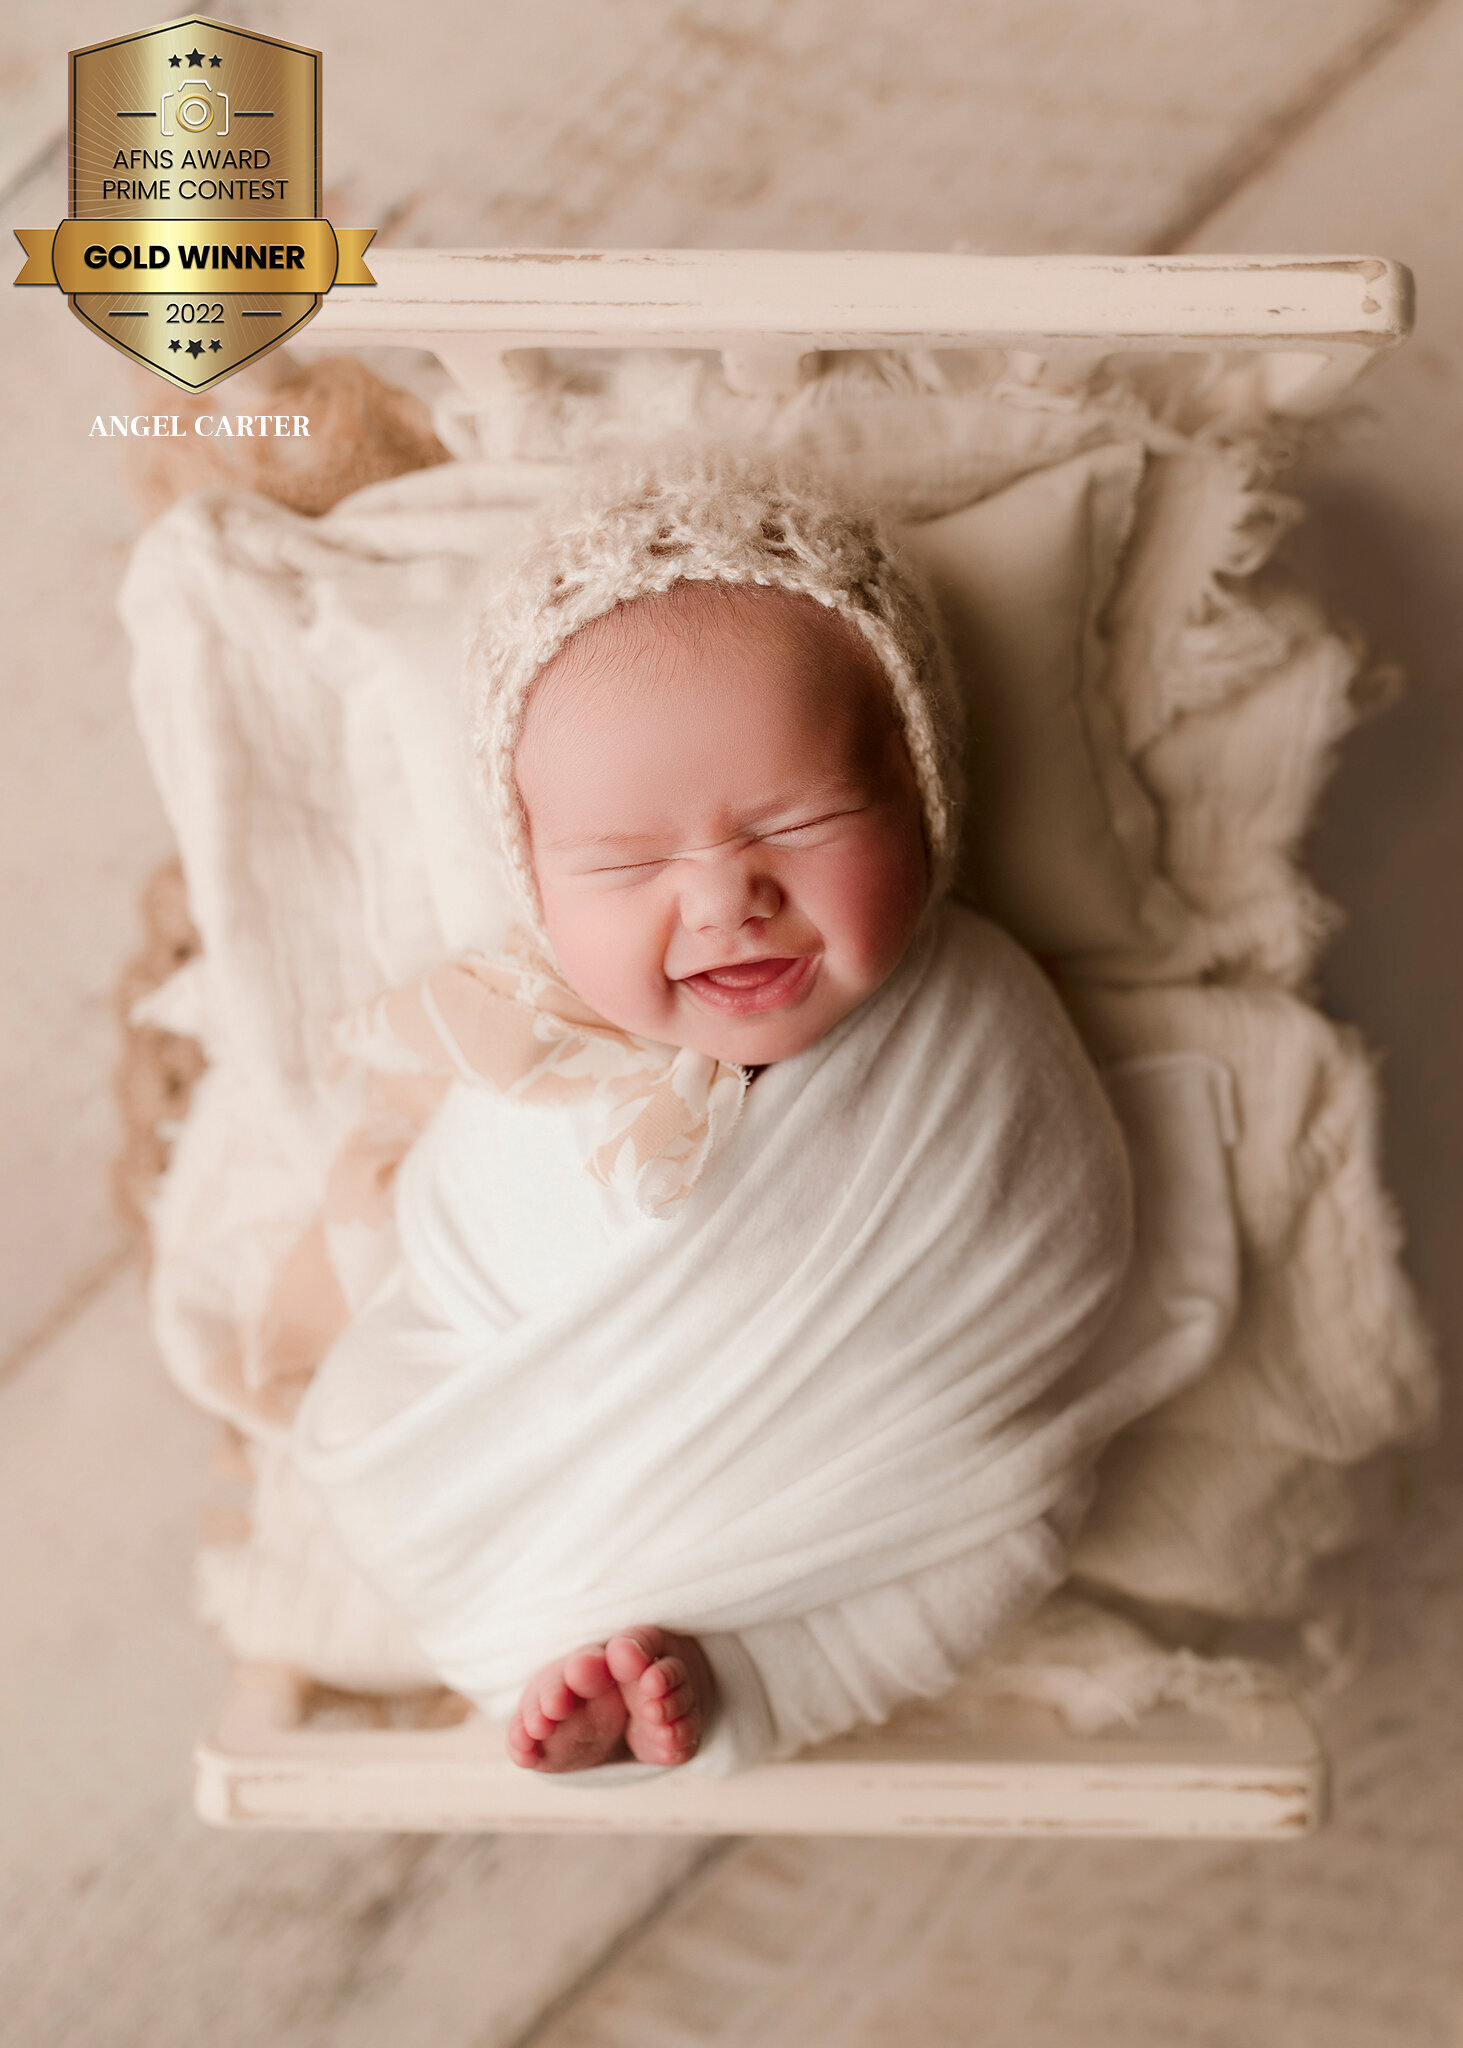 the biggest smile from baby girl at her photo session. 9/10 times we capture your newborn smiling at least once during their session with us. This is a true memory to savor.